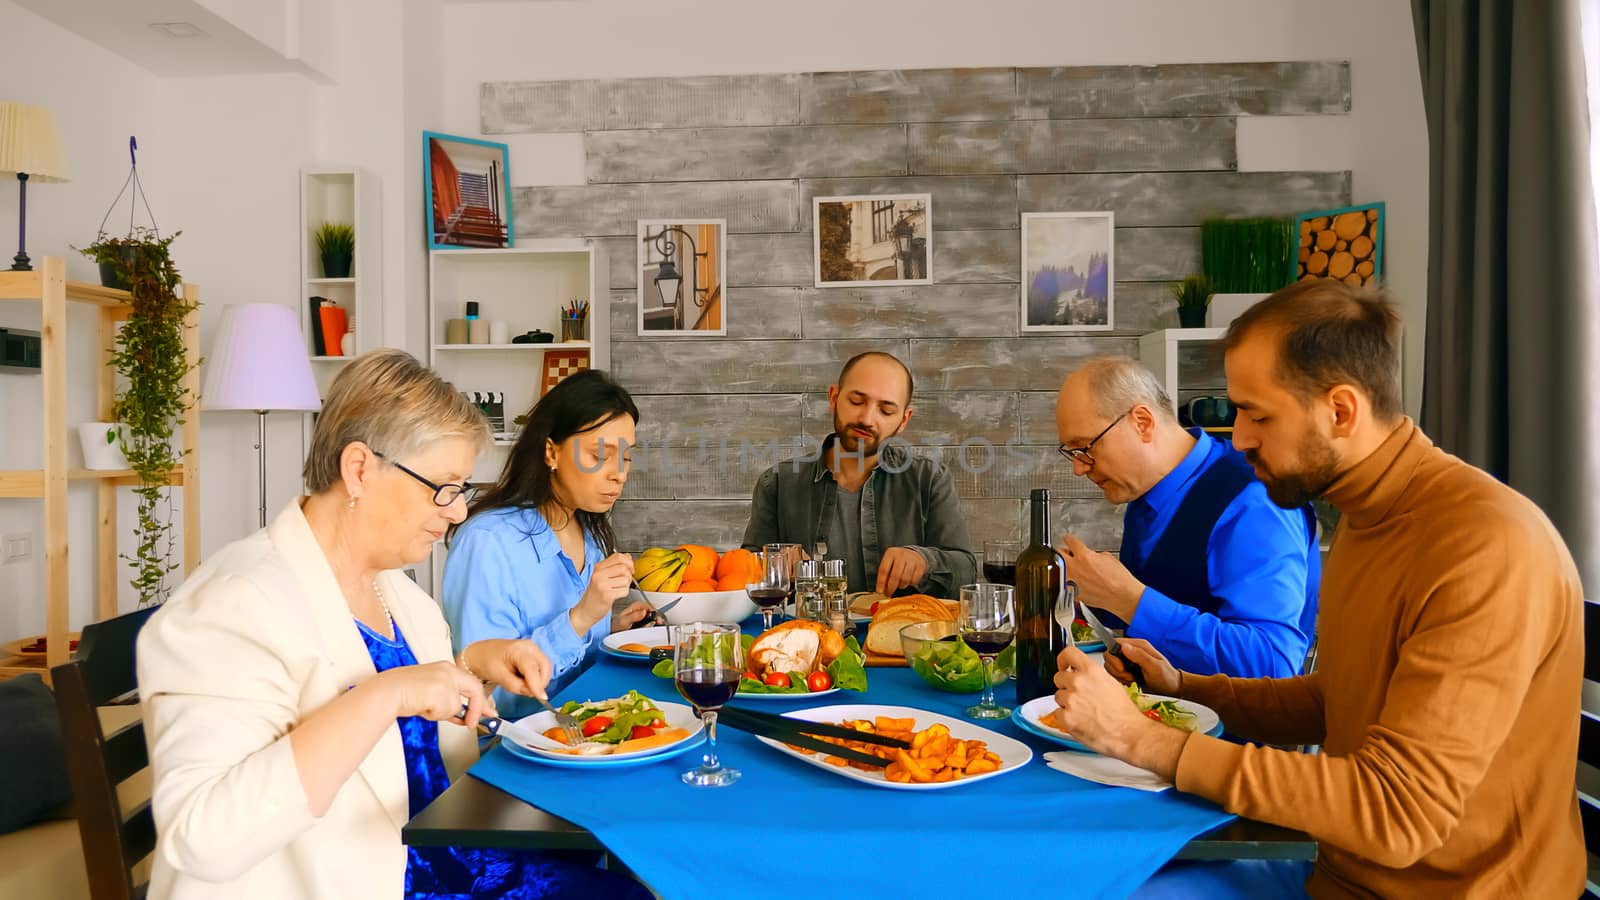 Zoom out shot of family enjoying delicious meal at dinner.